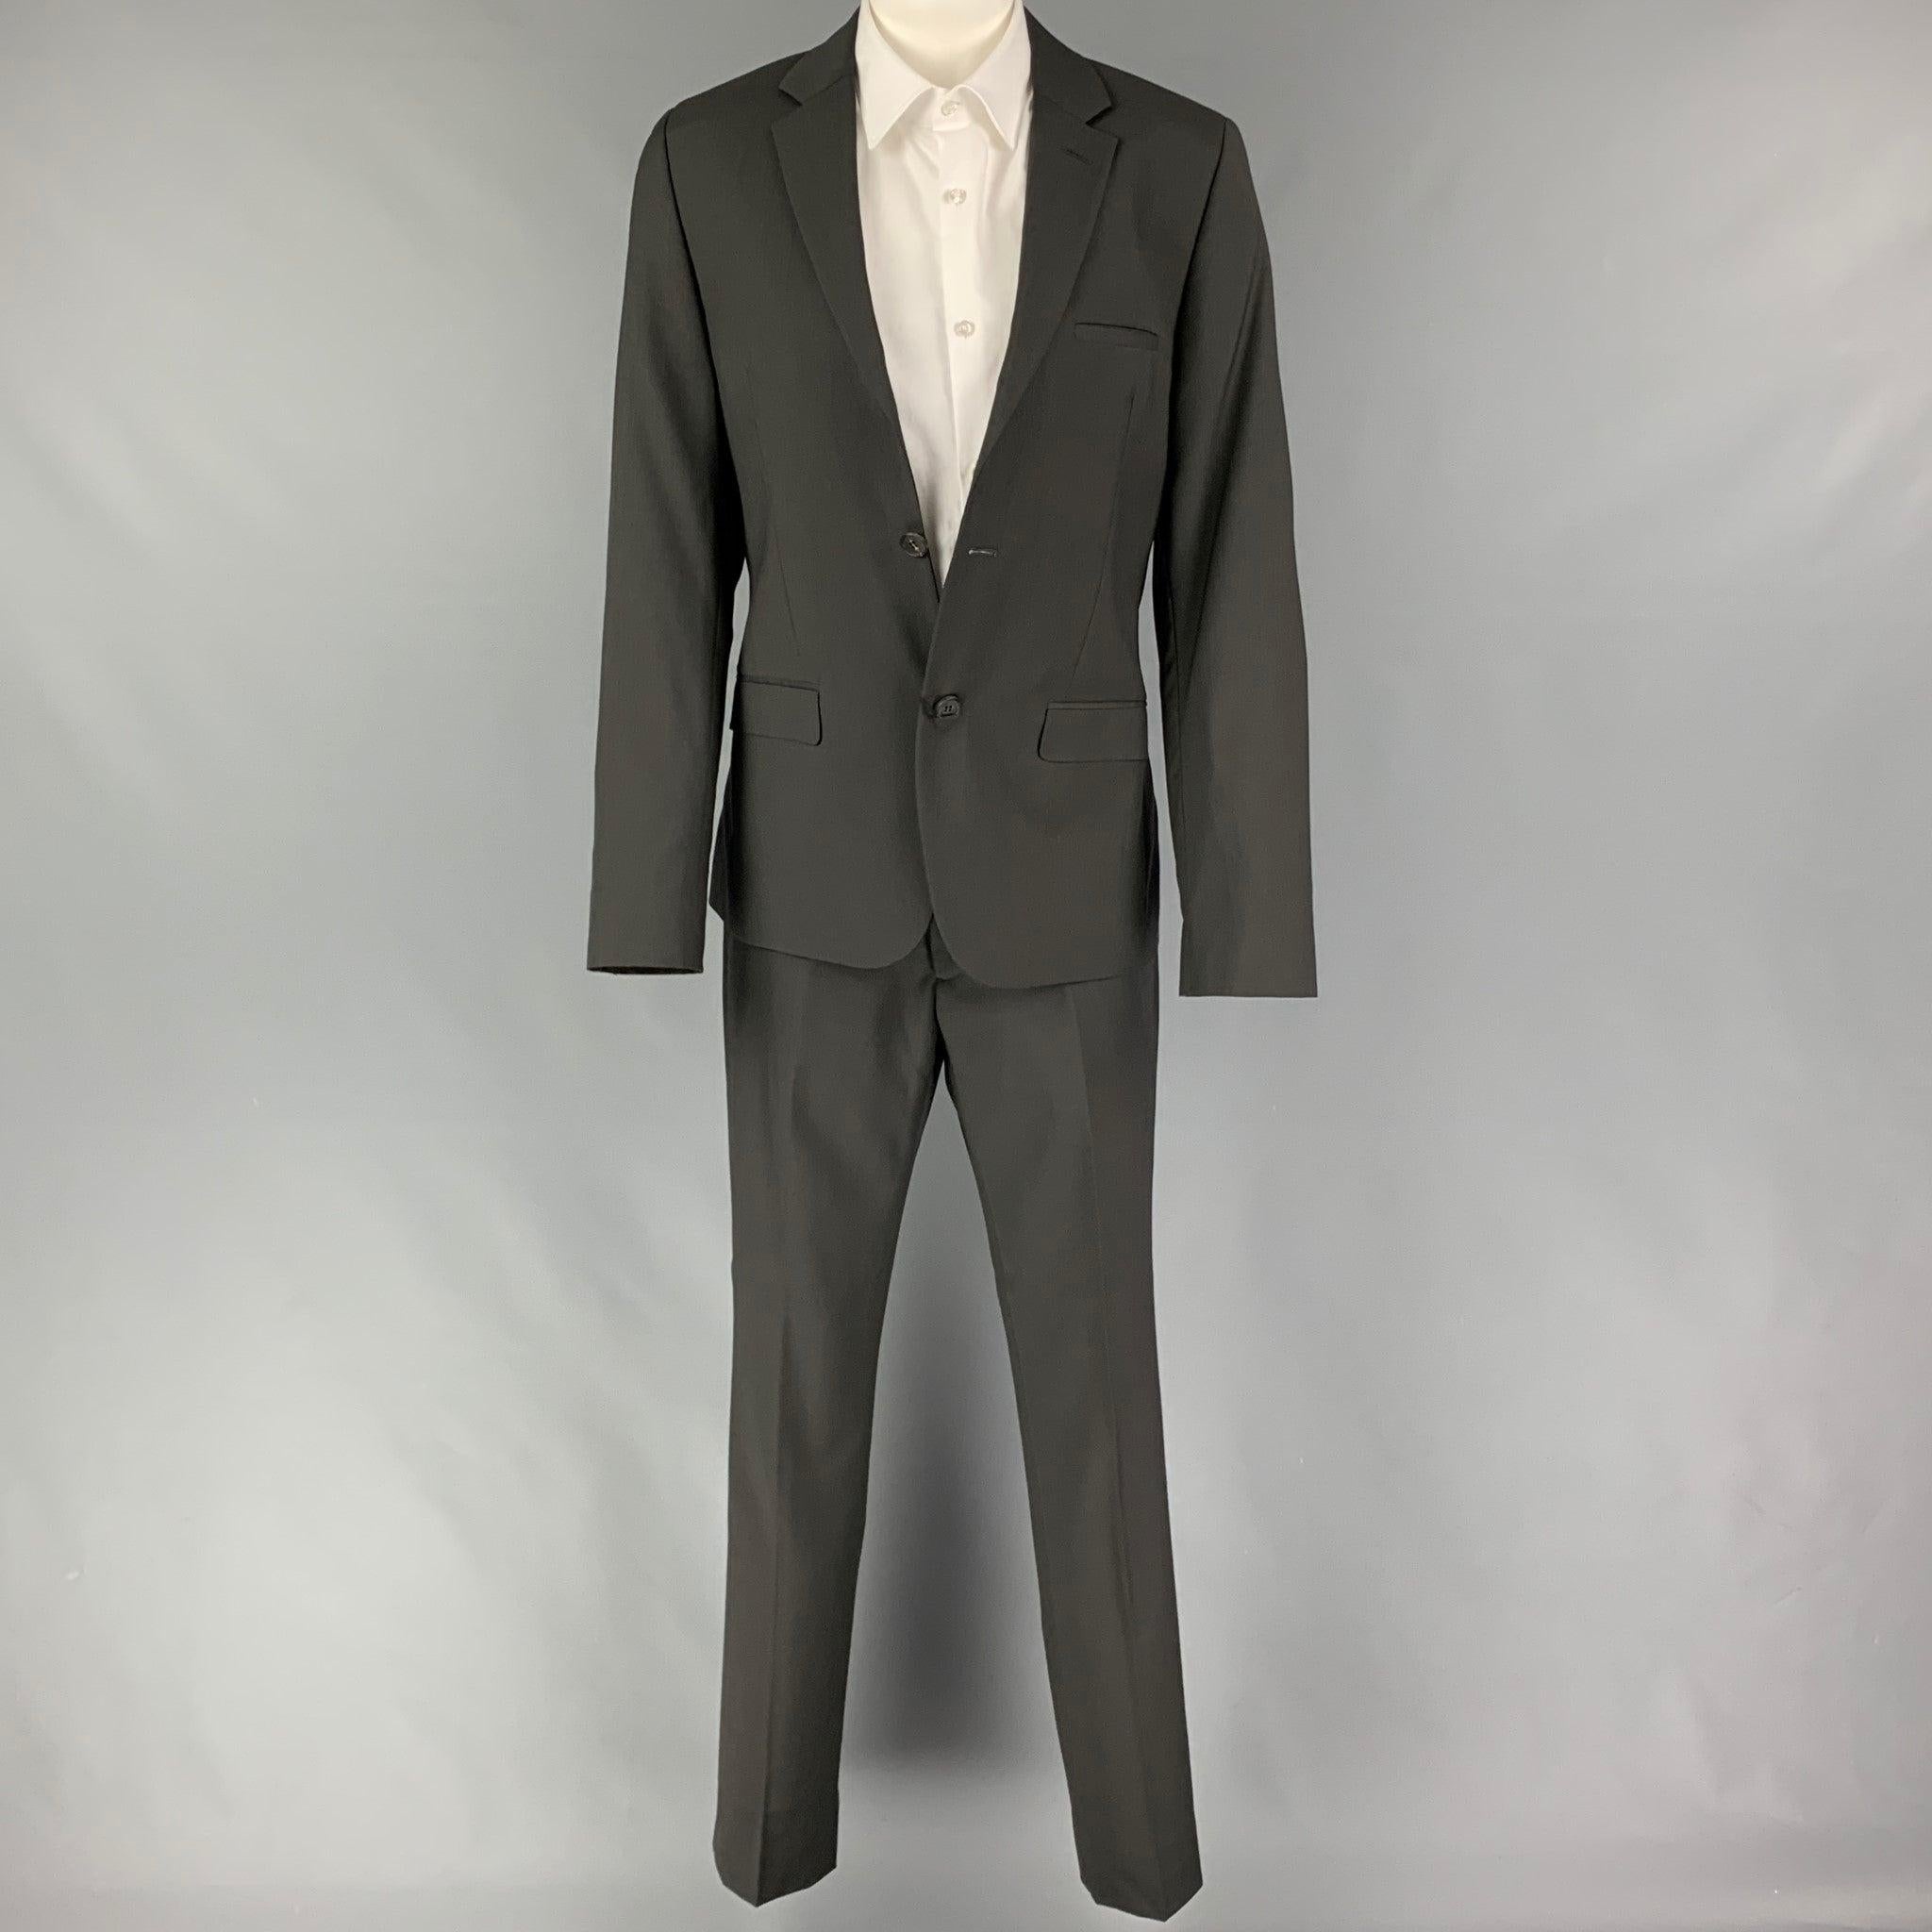 CALVIN KLEIN COLLECTION
suit comes in a charcoal wool 
with a full liner and includes a single breasted,
 double button sport coat with a notch lapel and matching flat front trousers. New With Tags. 

Marked:   46/36 

Measurements: 
 